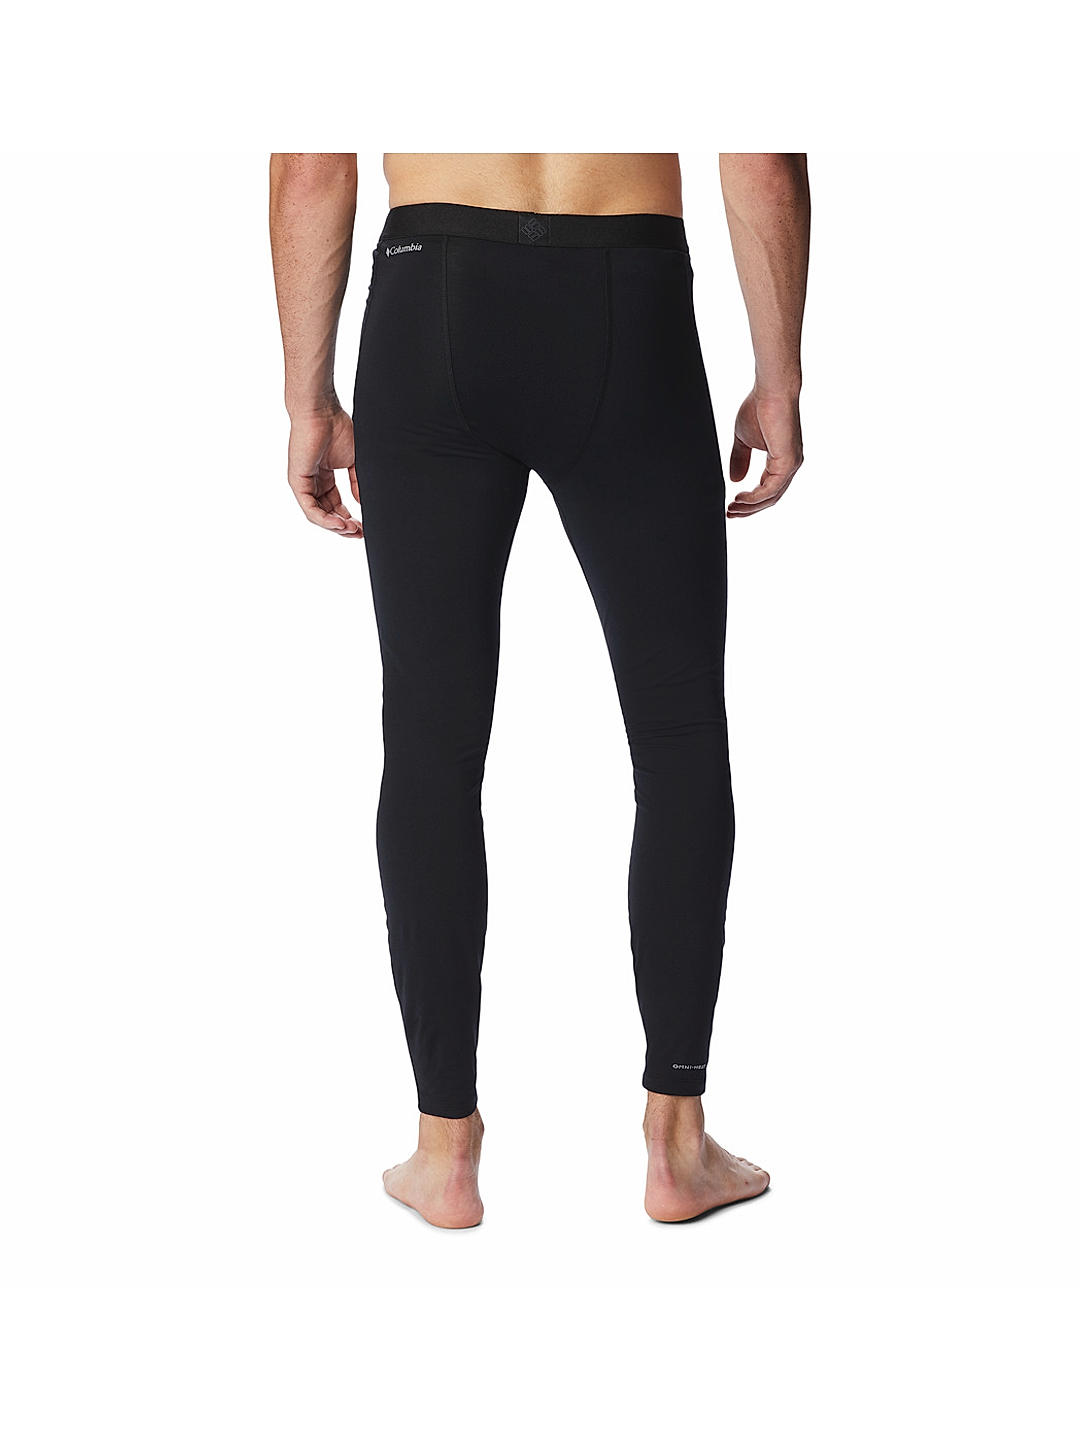 Buy Black Midweight Stretch Tight for Men Online at Columbia Sportswear